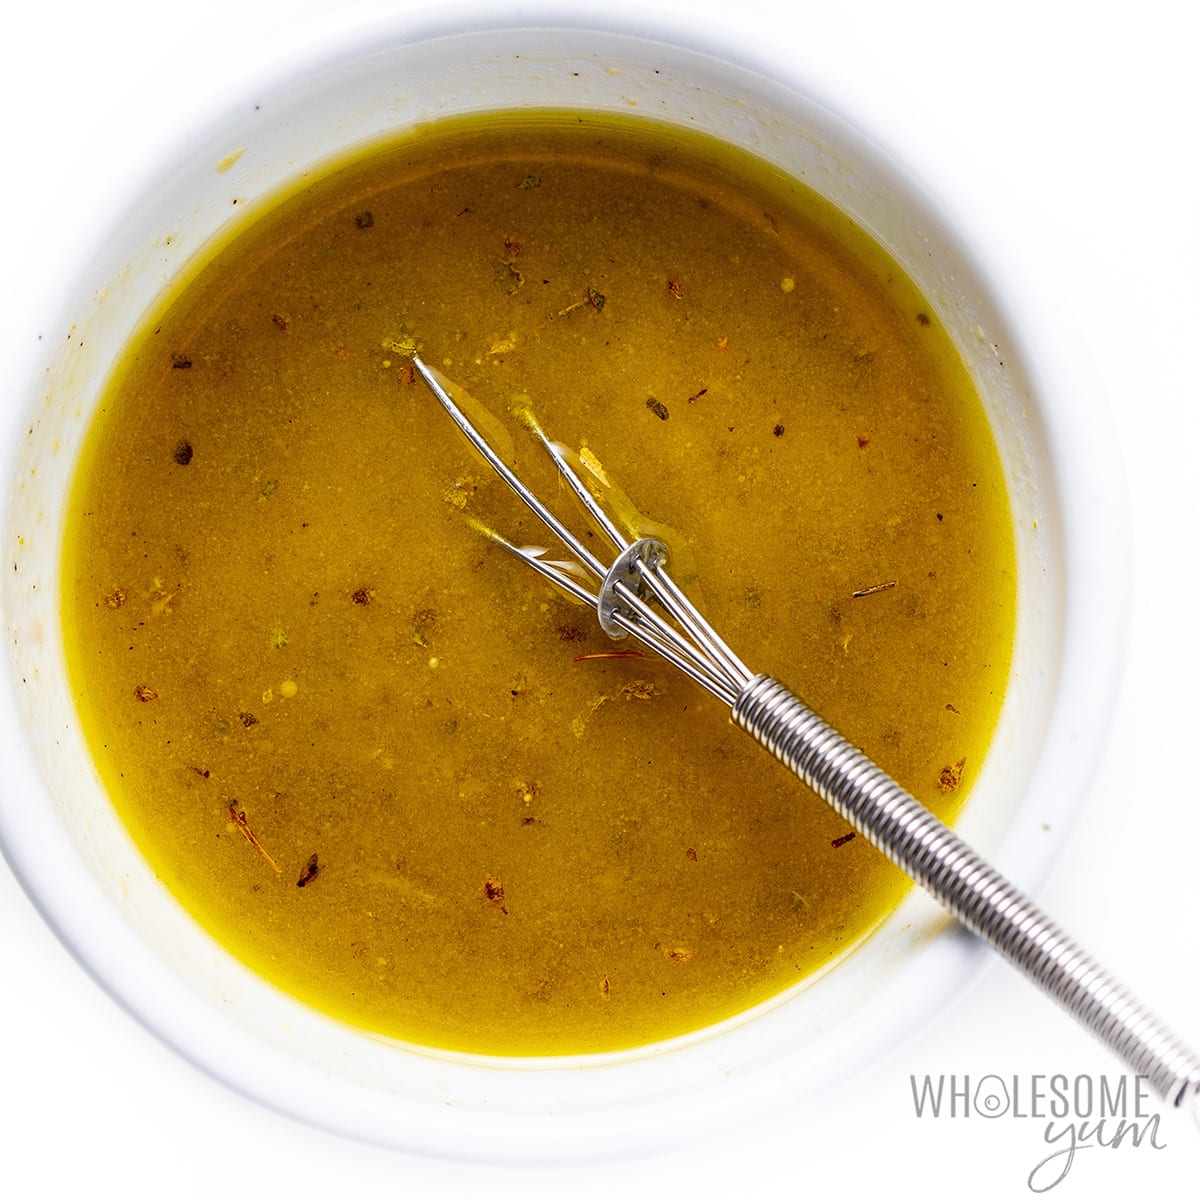 Greek salad dressing recipe whisked in a bowl.